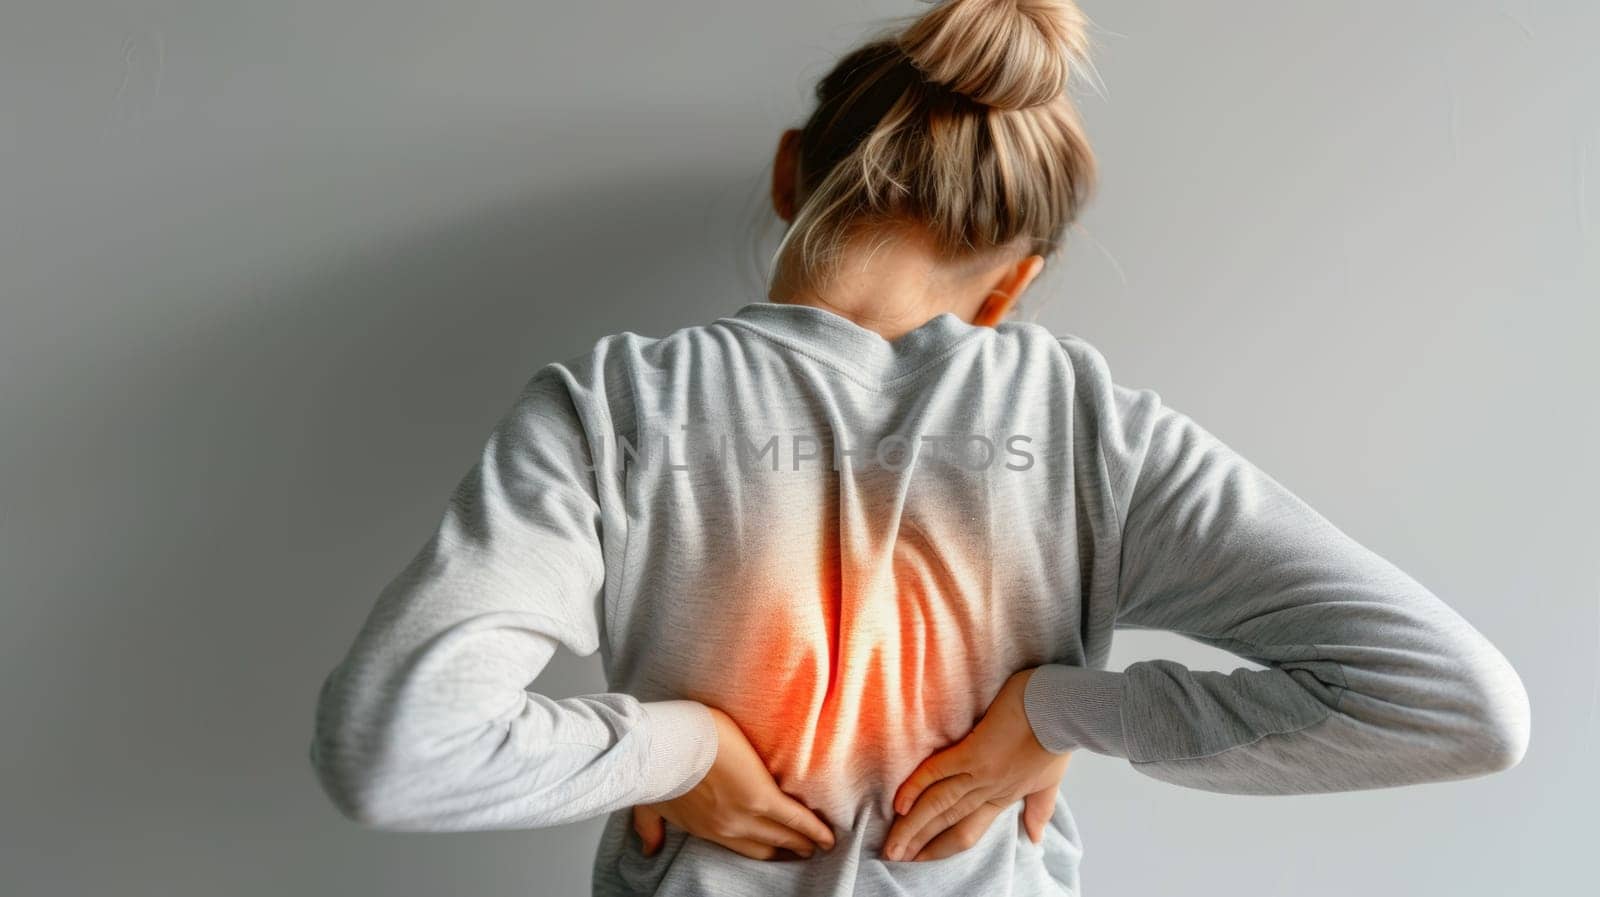 The image shows a woman from behind as she holds her lower back, a visual metaphor for sharp pain. The soft grey tones of her clothing contrast with the vibrant red depicted as pain